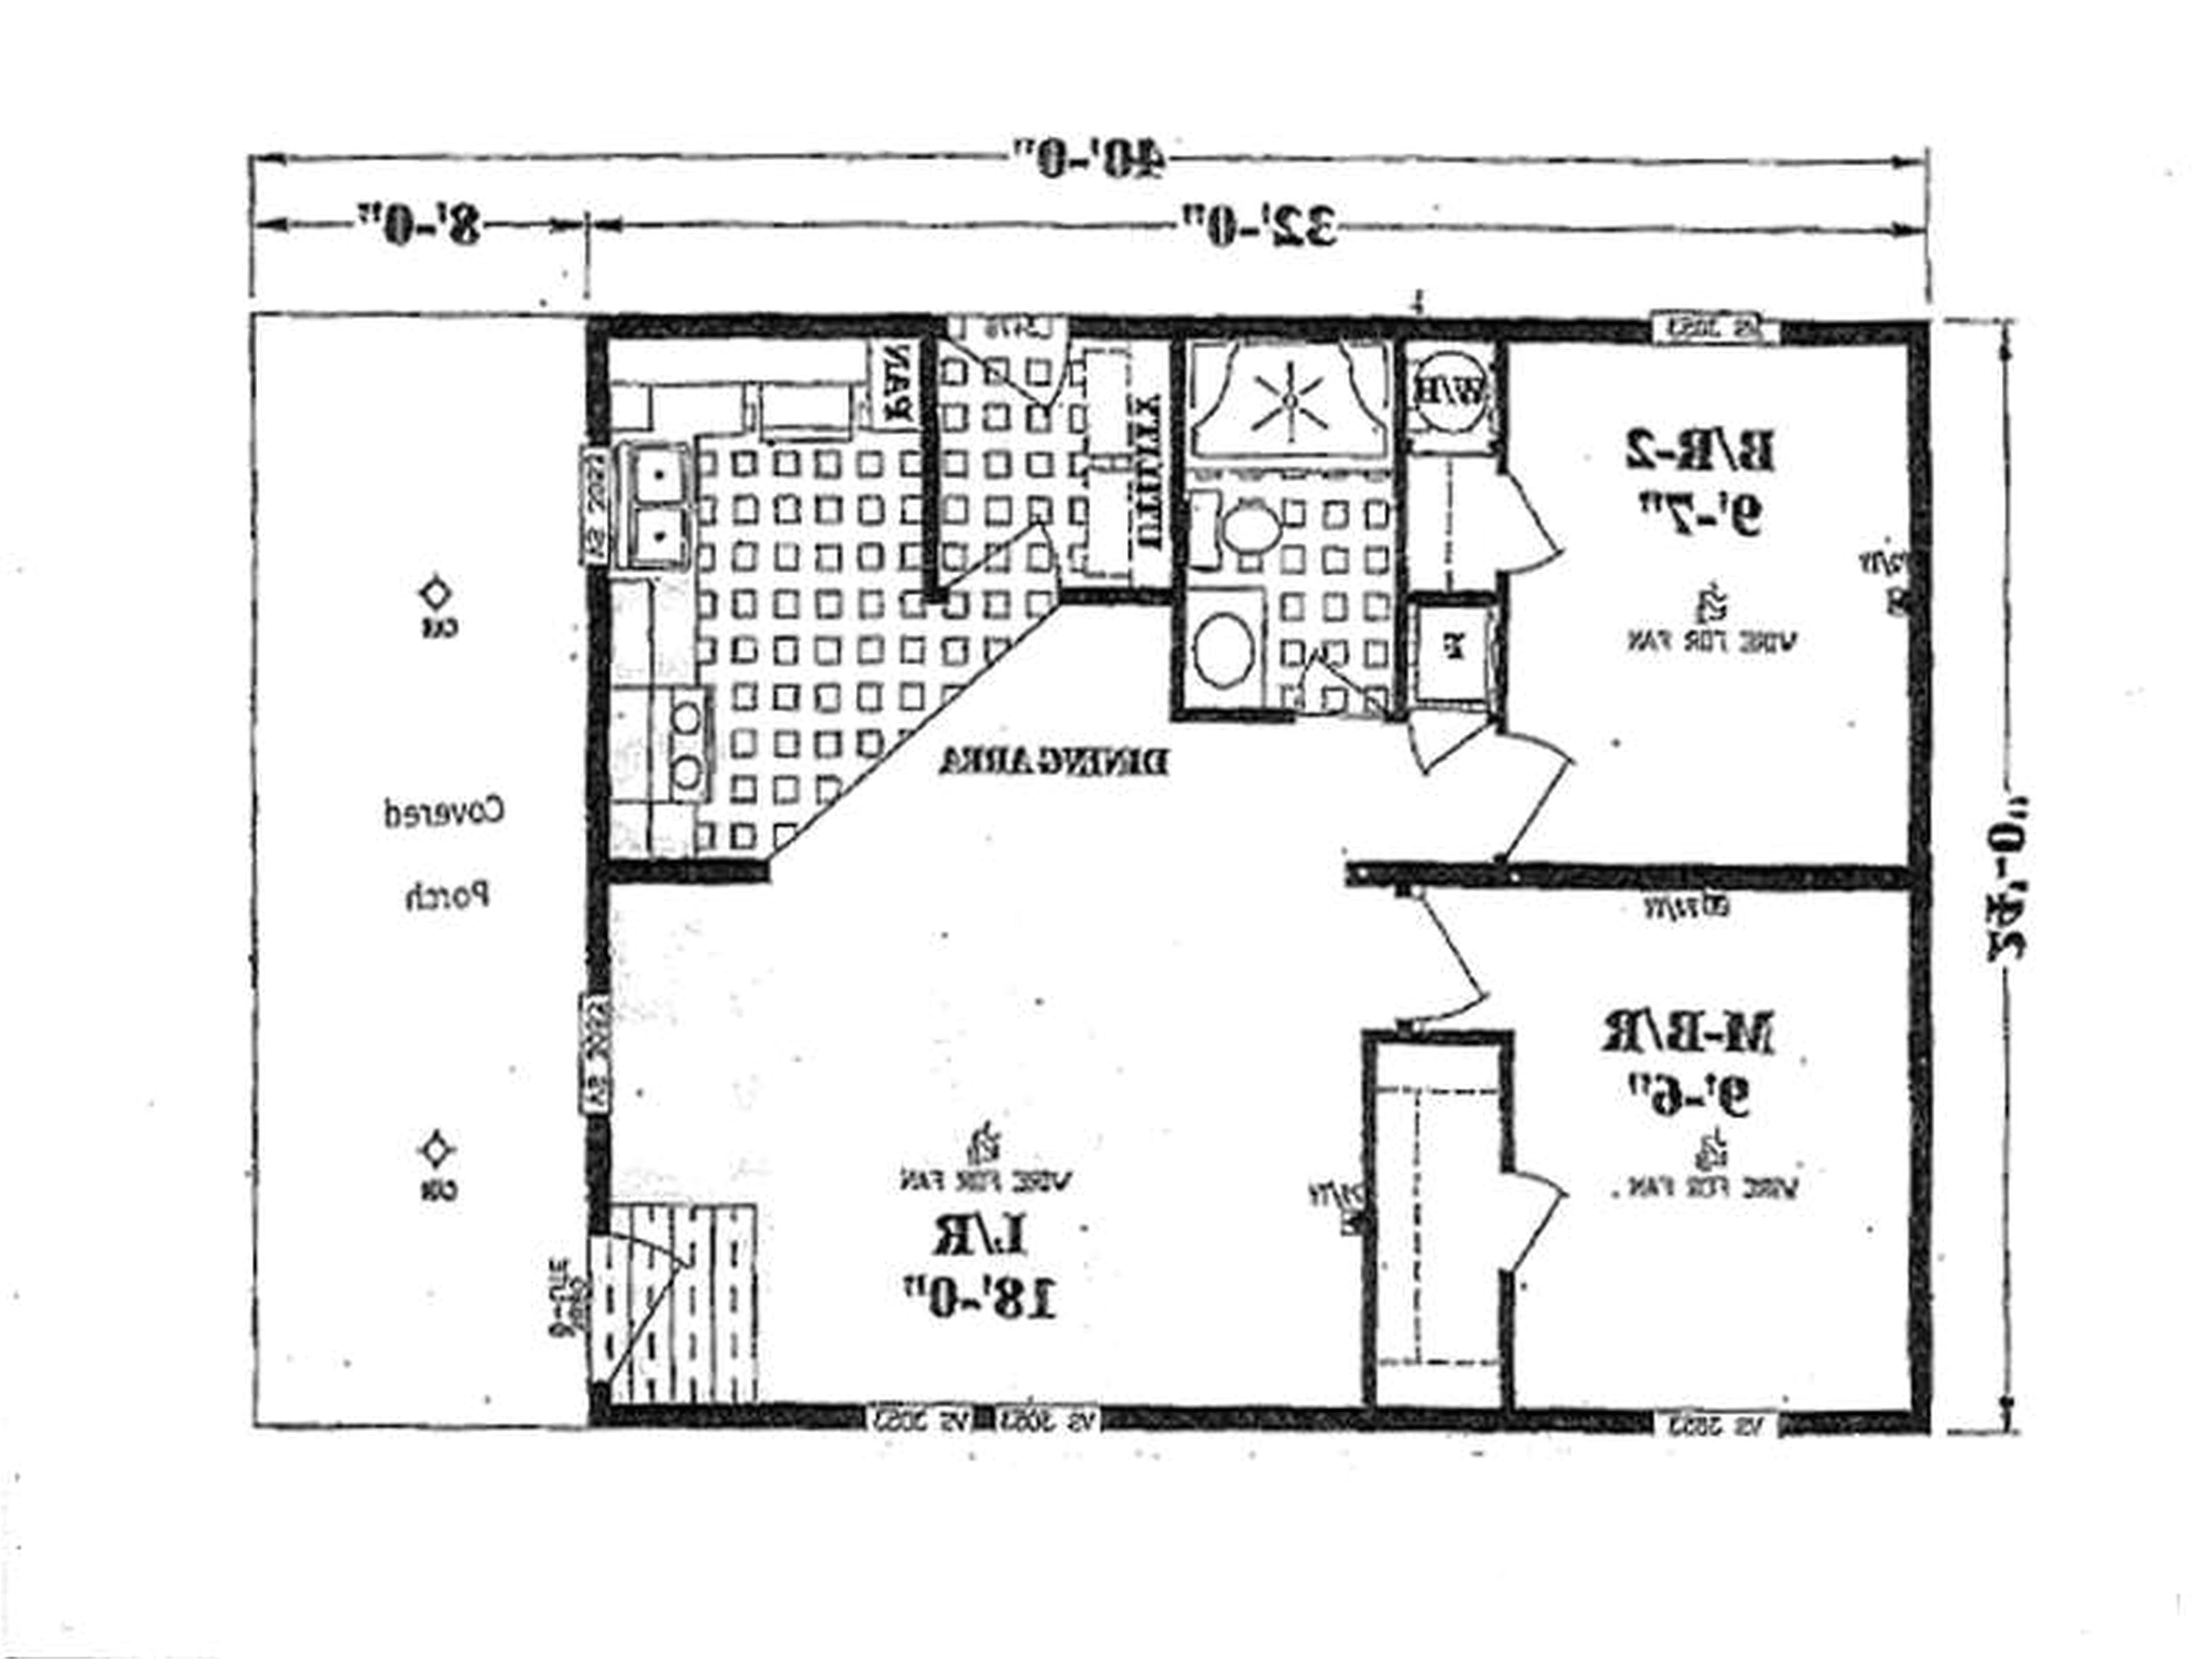 2 bedroom ranch style house plans